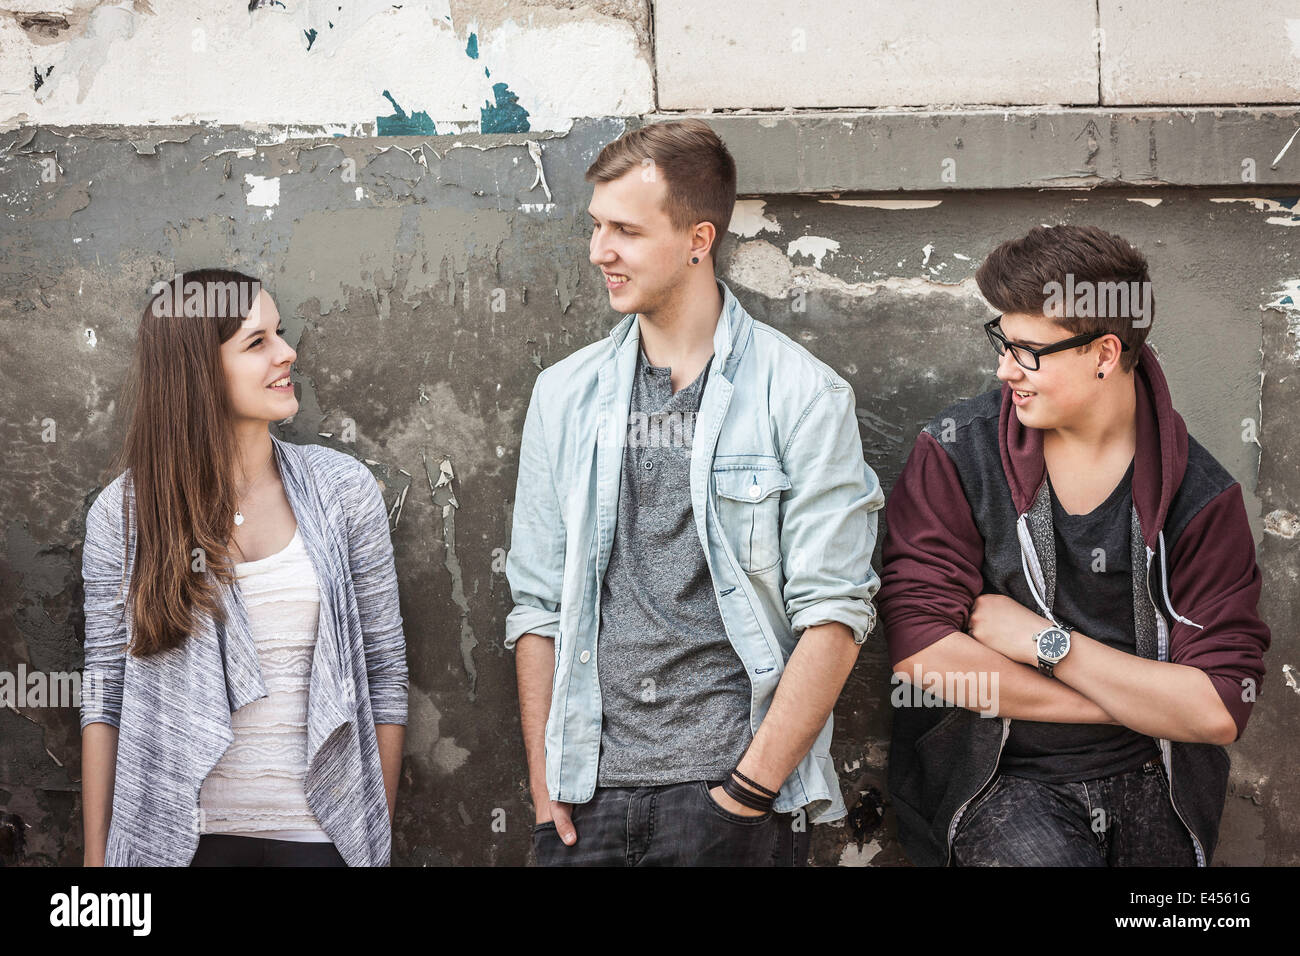 Teenagers hanging out at abandoned building Stock Photo